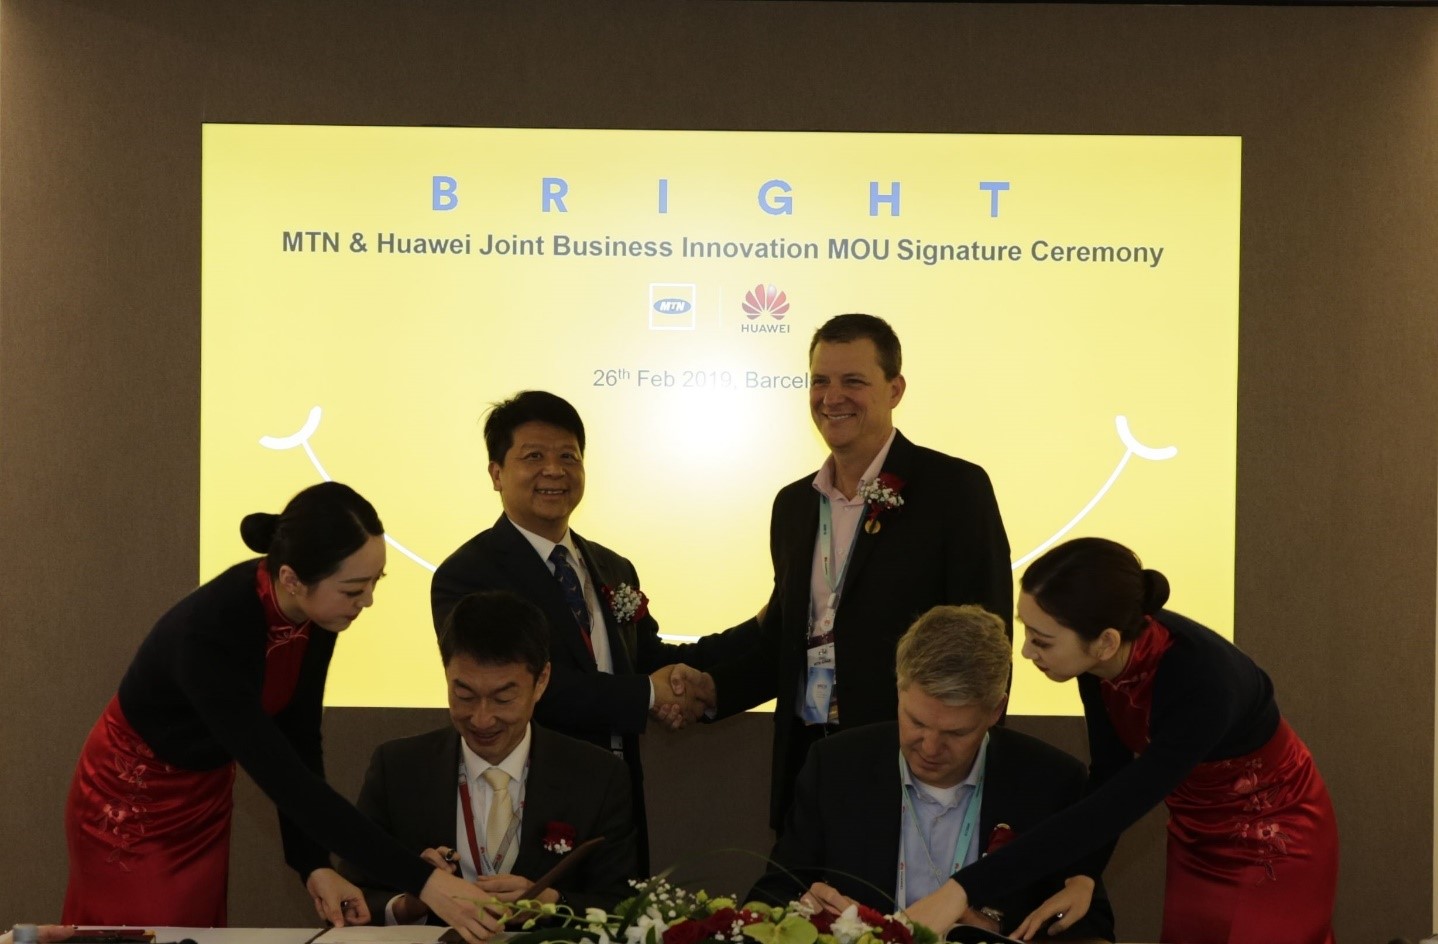 Huawei and MTN Group representatives signing a a Joint Business Innovation MoU at the Mobile World Congress 2019 in Barcelona.